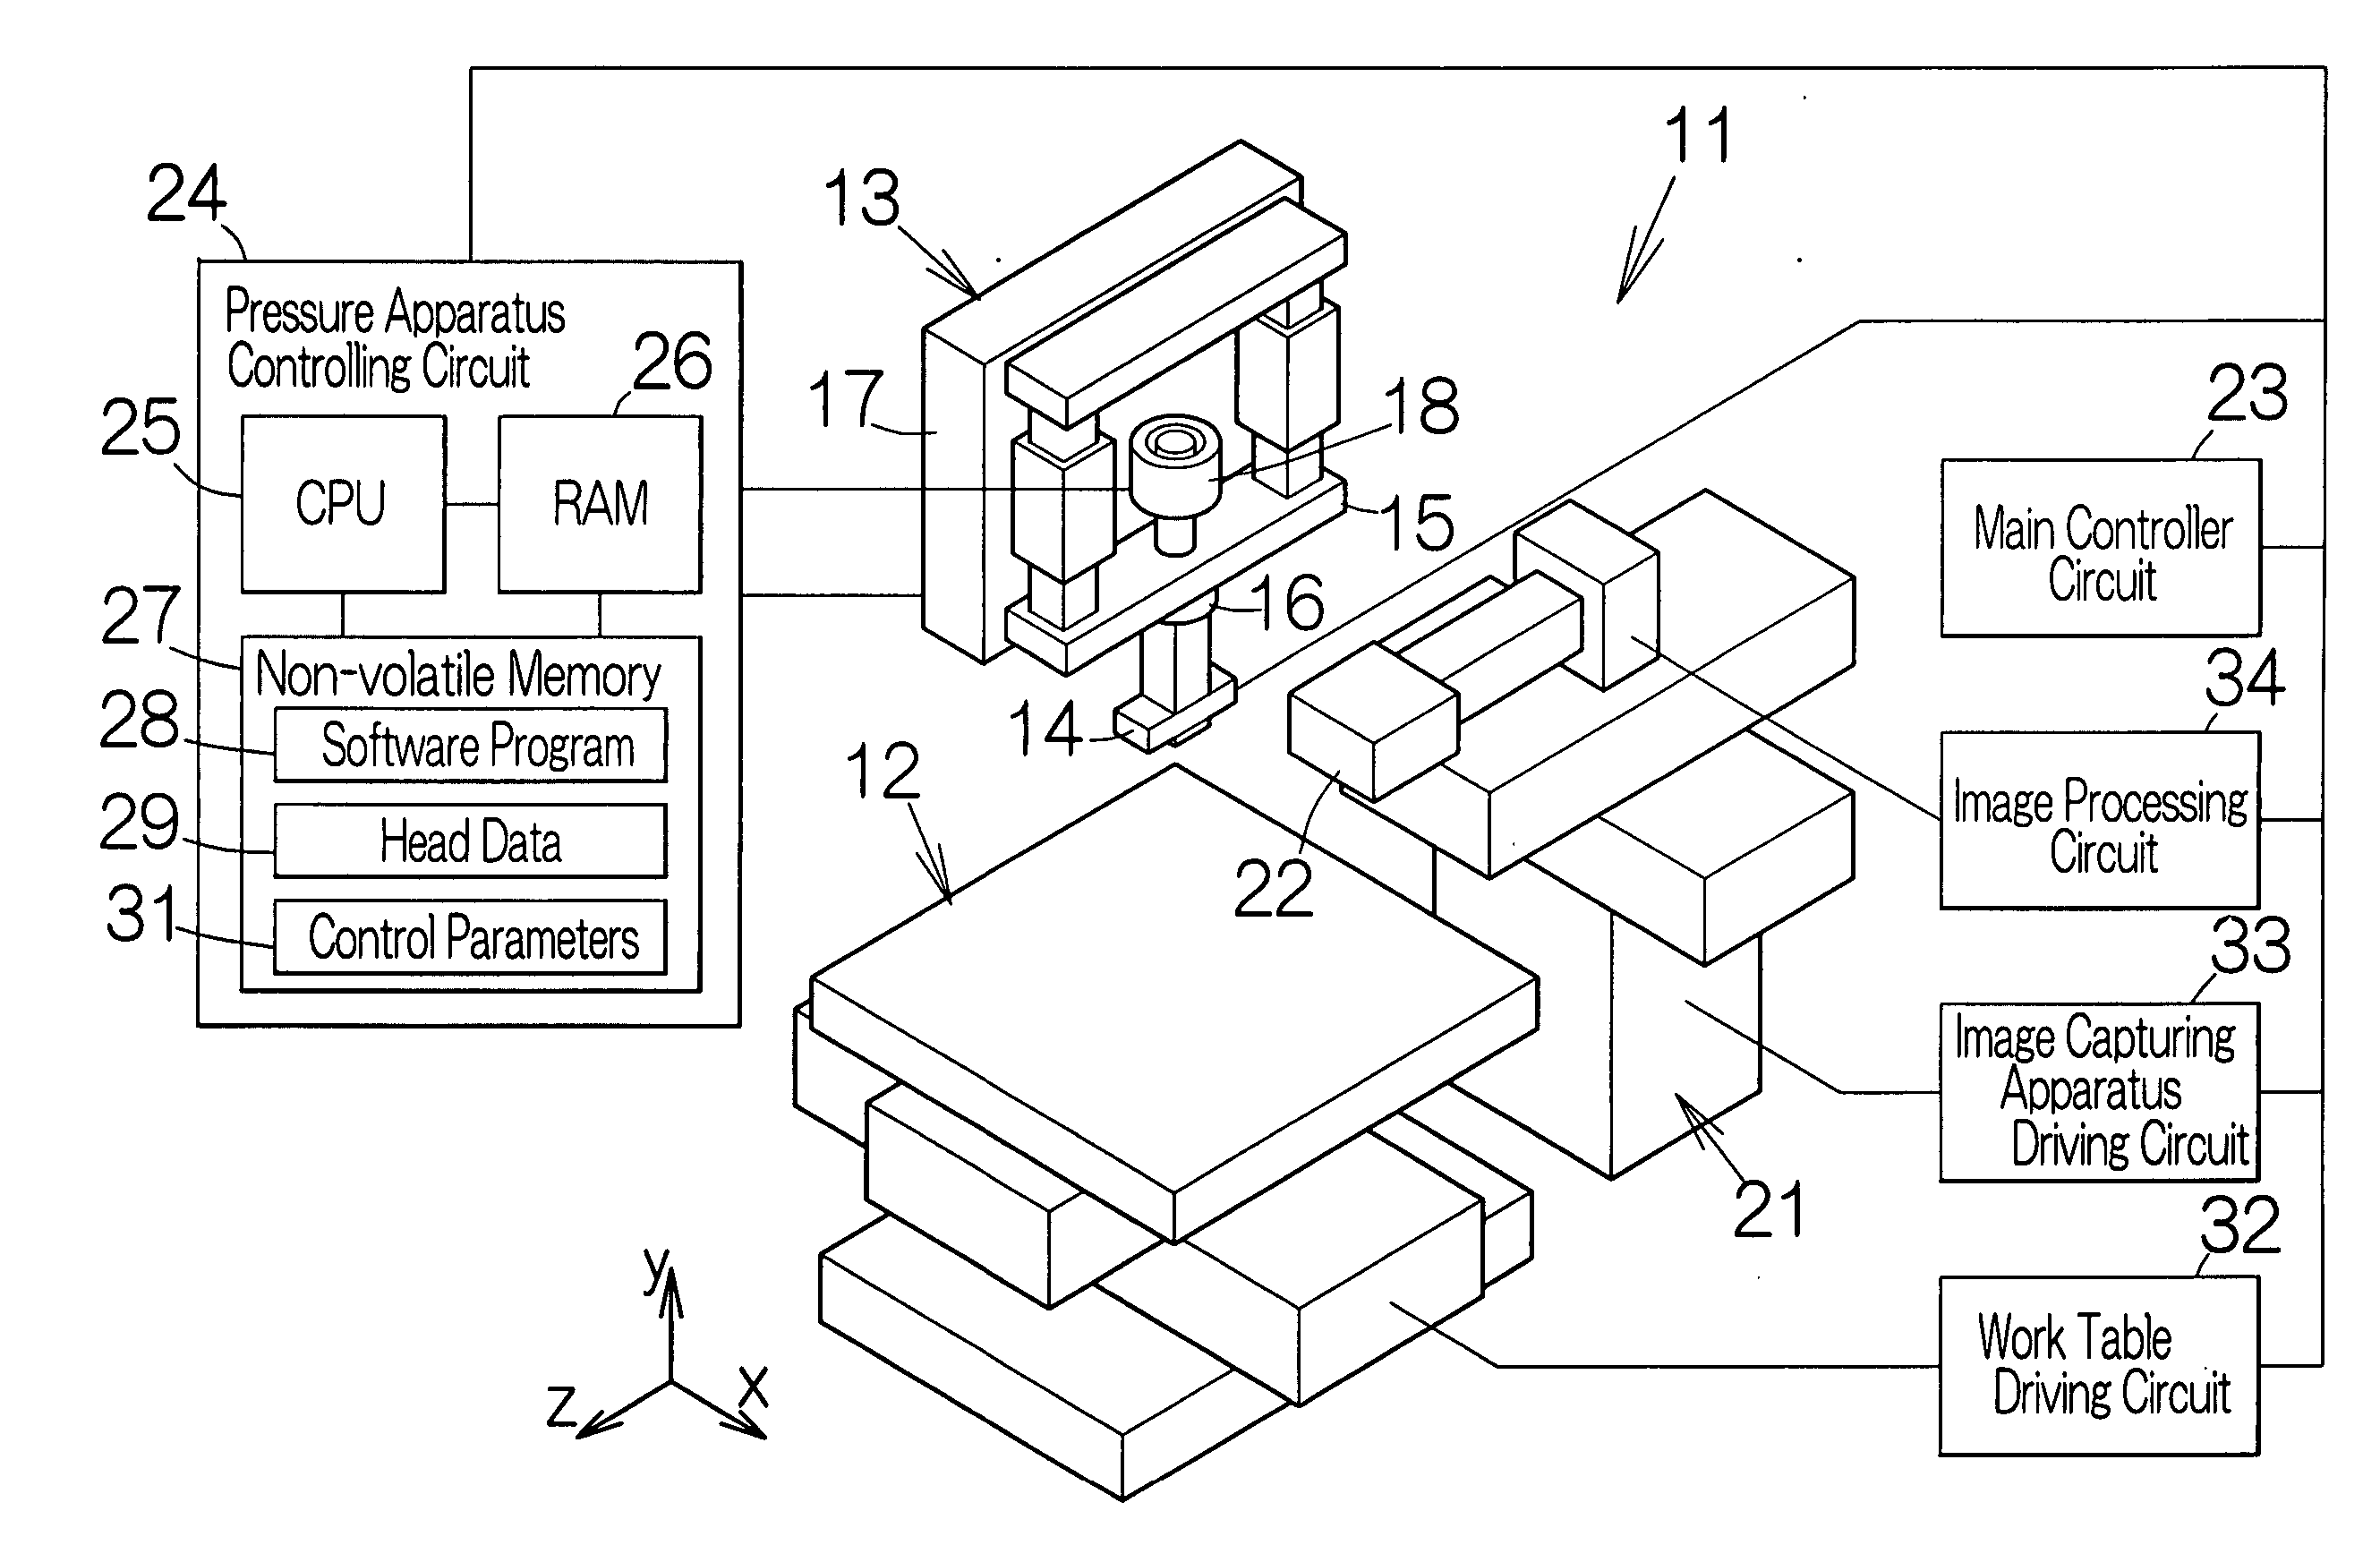 Identifying unit for working machine and pressure apparatus